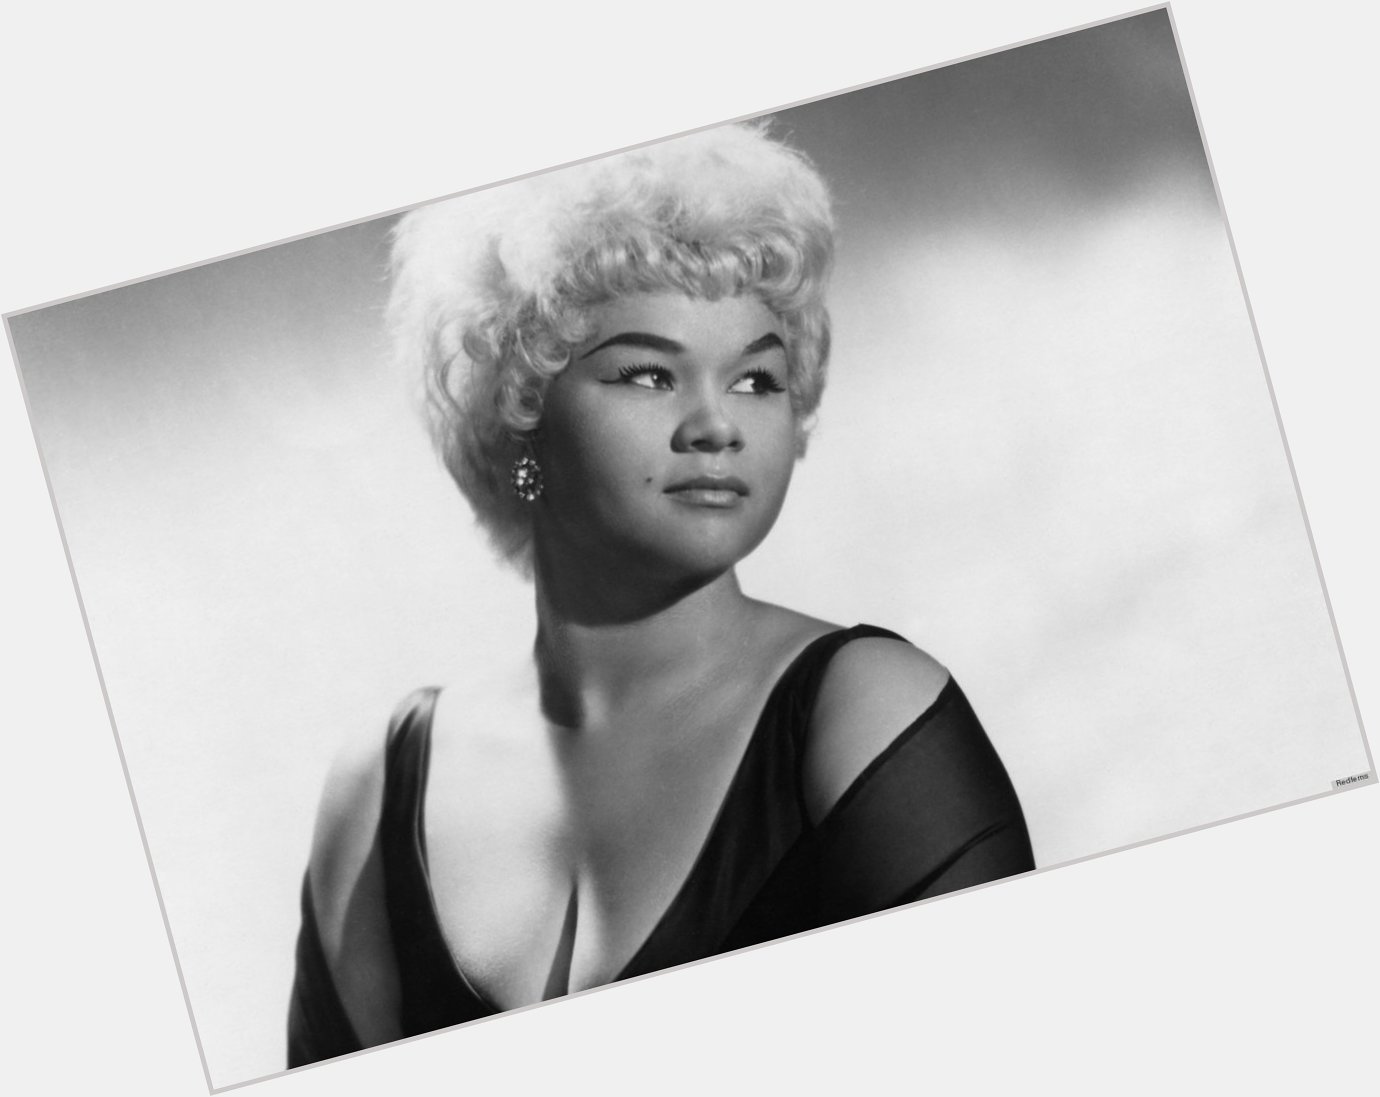 It feels so good to be happy. Etta James
Happy Birthday to the late great 